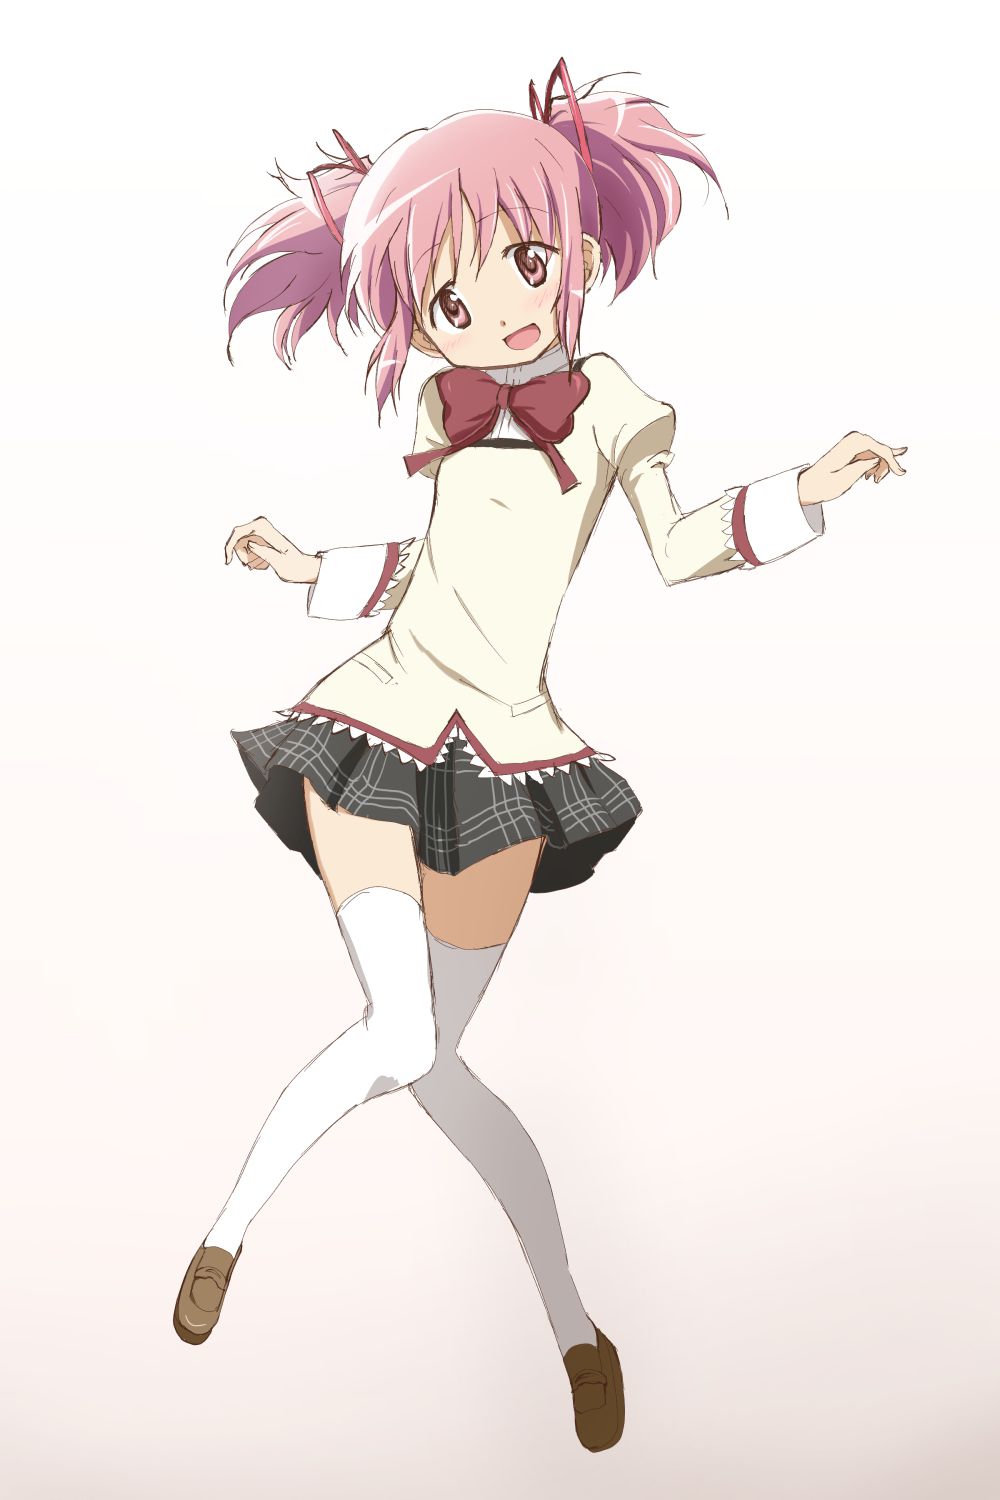 Kaname Madoka "I do not see it with naughty eyes because it is a magical girl..." ← This W, W, W 5